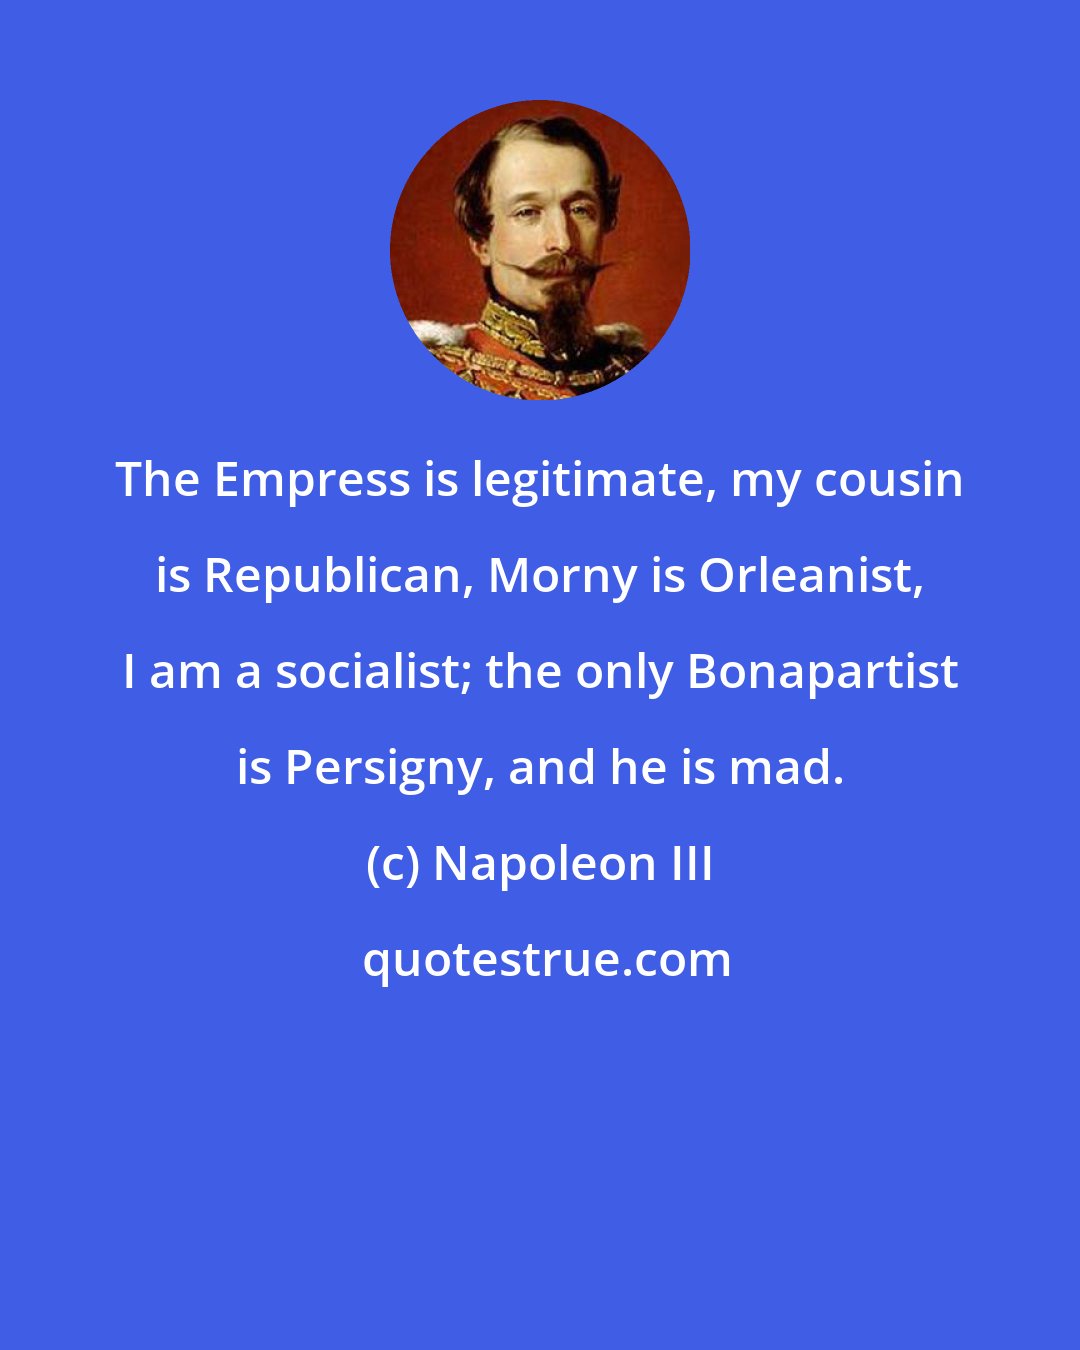 Napoleon III: The Empress is legitimate, my cousin is Republican, Morny is Orleanist, I am a socialist; the only Bonapartist is Persigny, and he is mad.